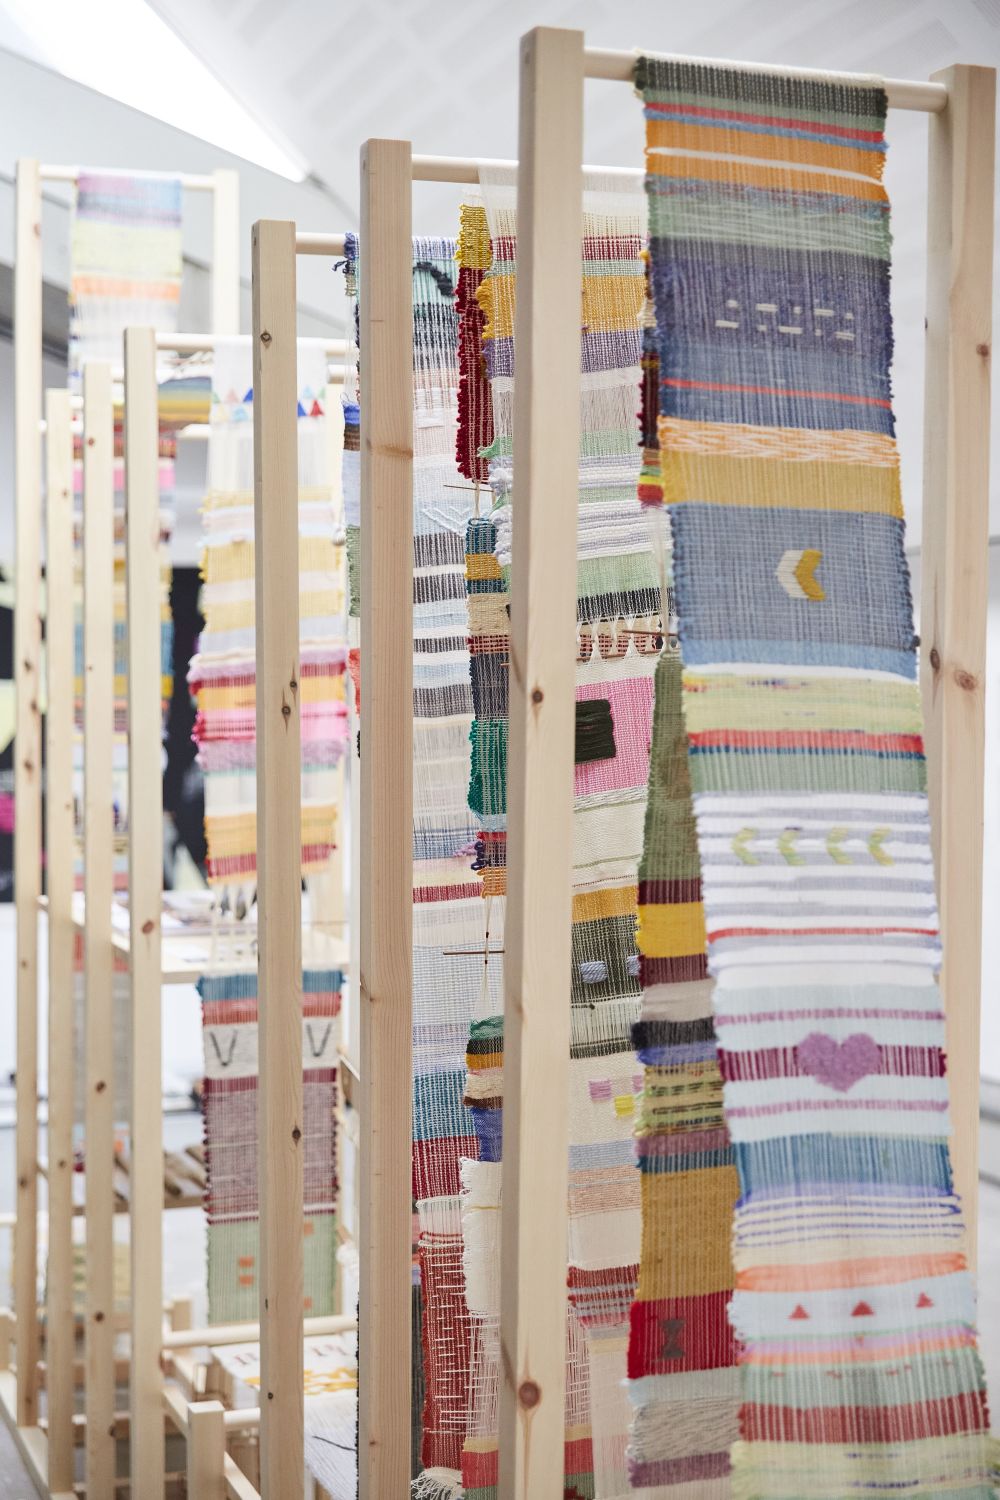 Section of large textiles sculpture from degree show